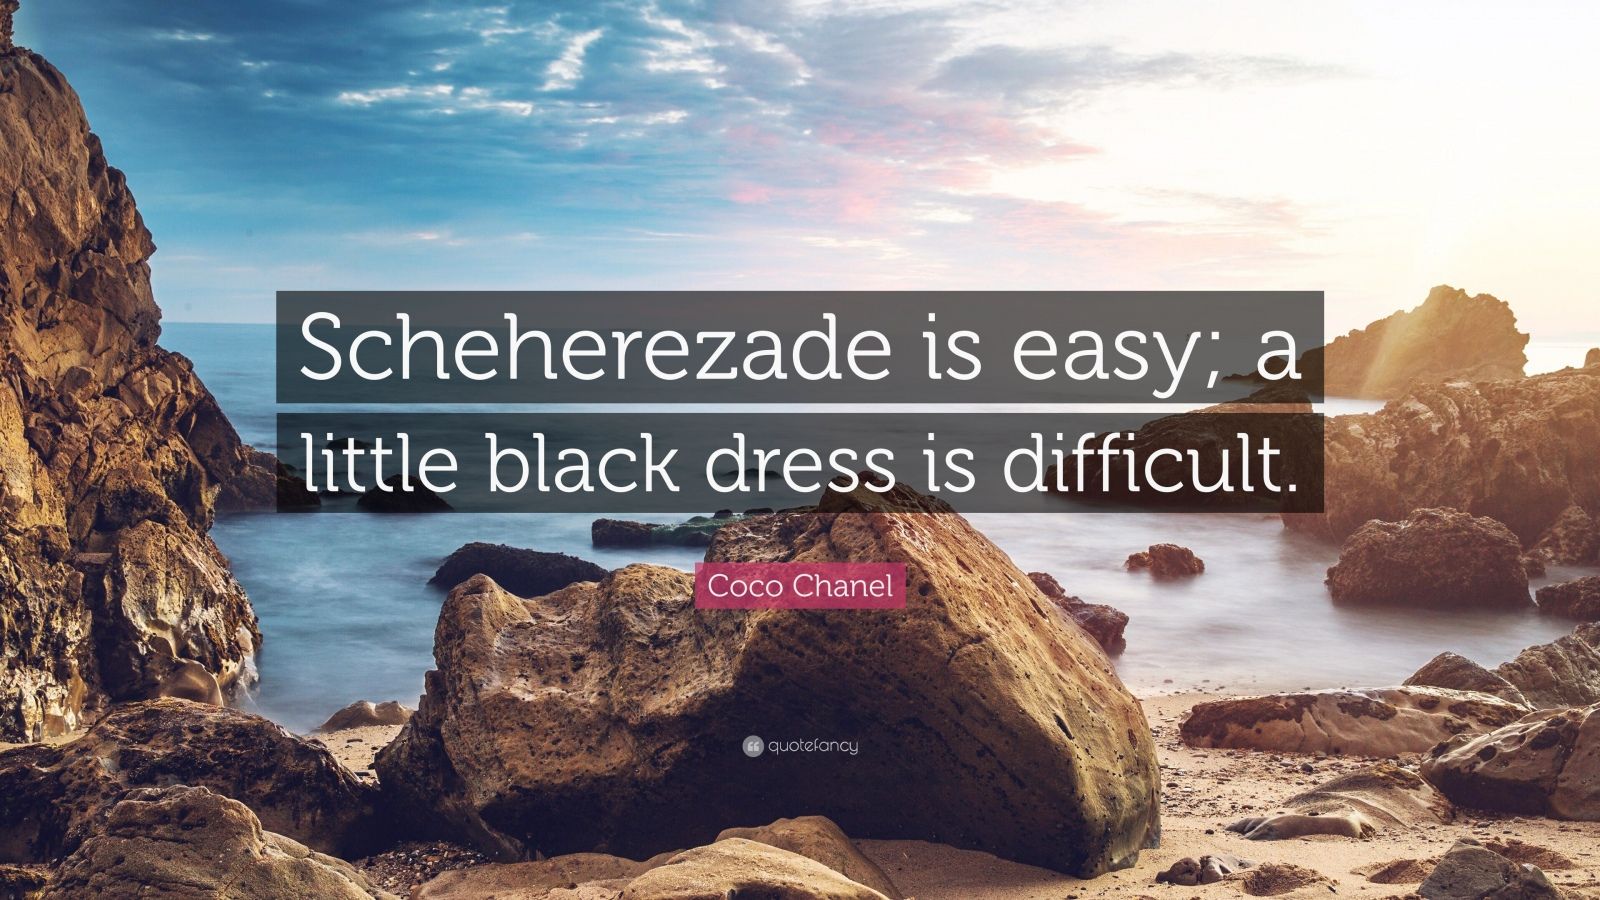 Coco Chanel Quote: “Scheherezade is easy; a little black dress is difficult .”